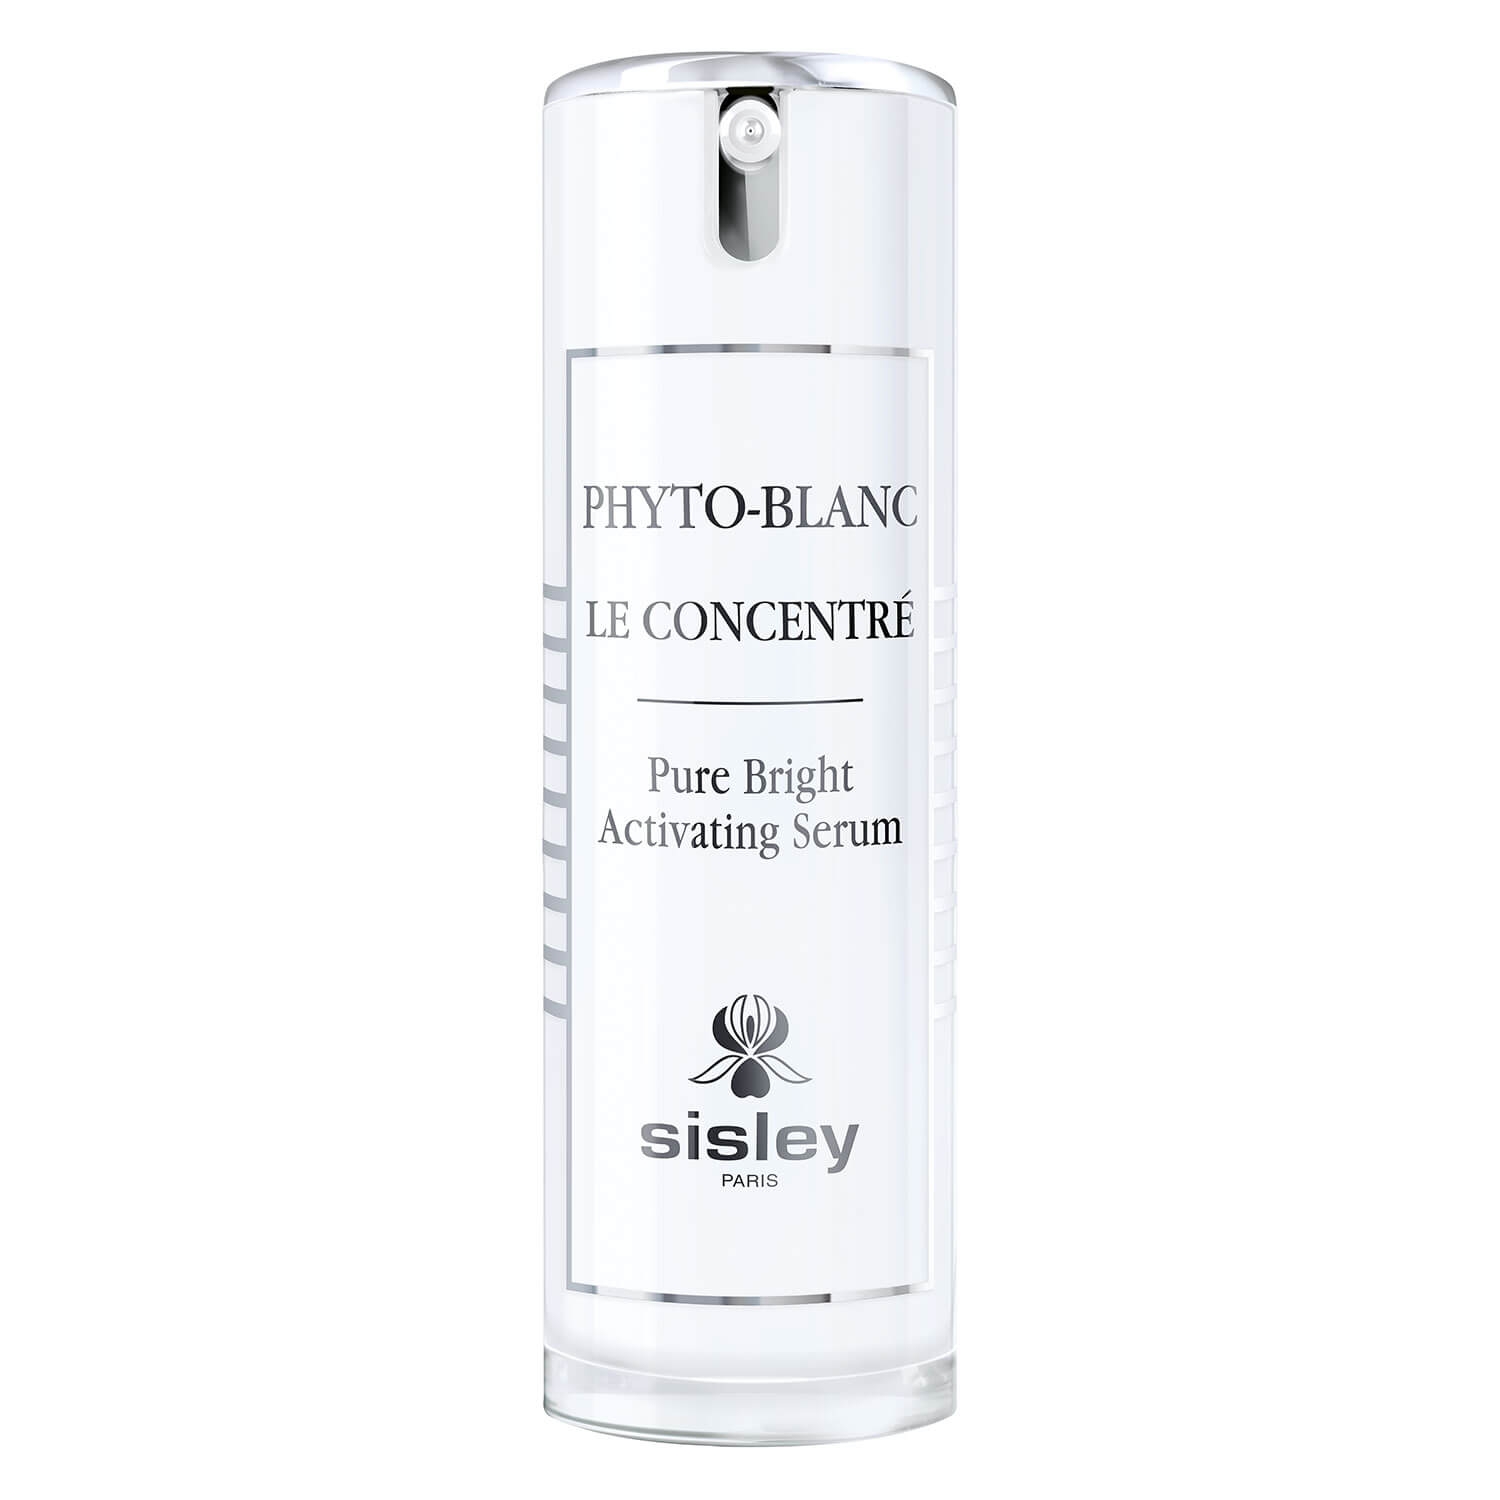 Product image from Sisley Skincare - Phyto-Blanc Le Concentré